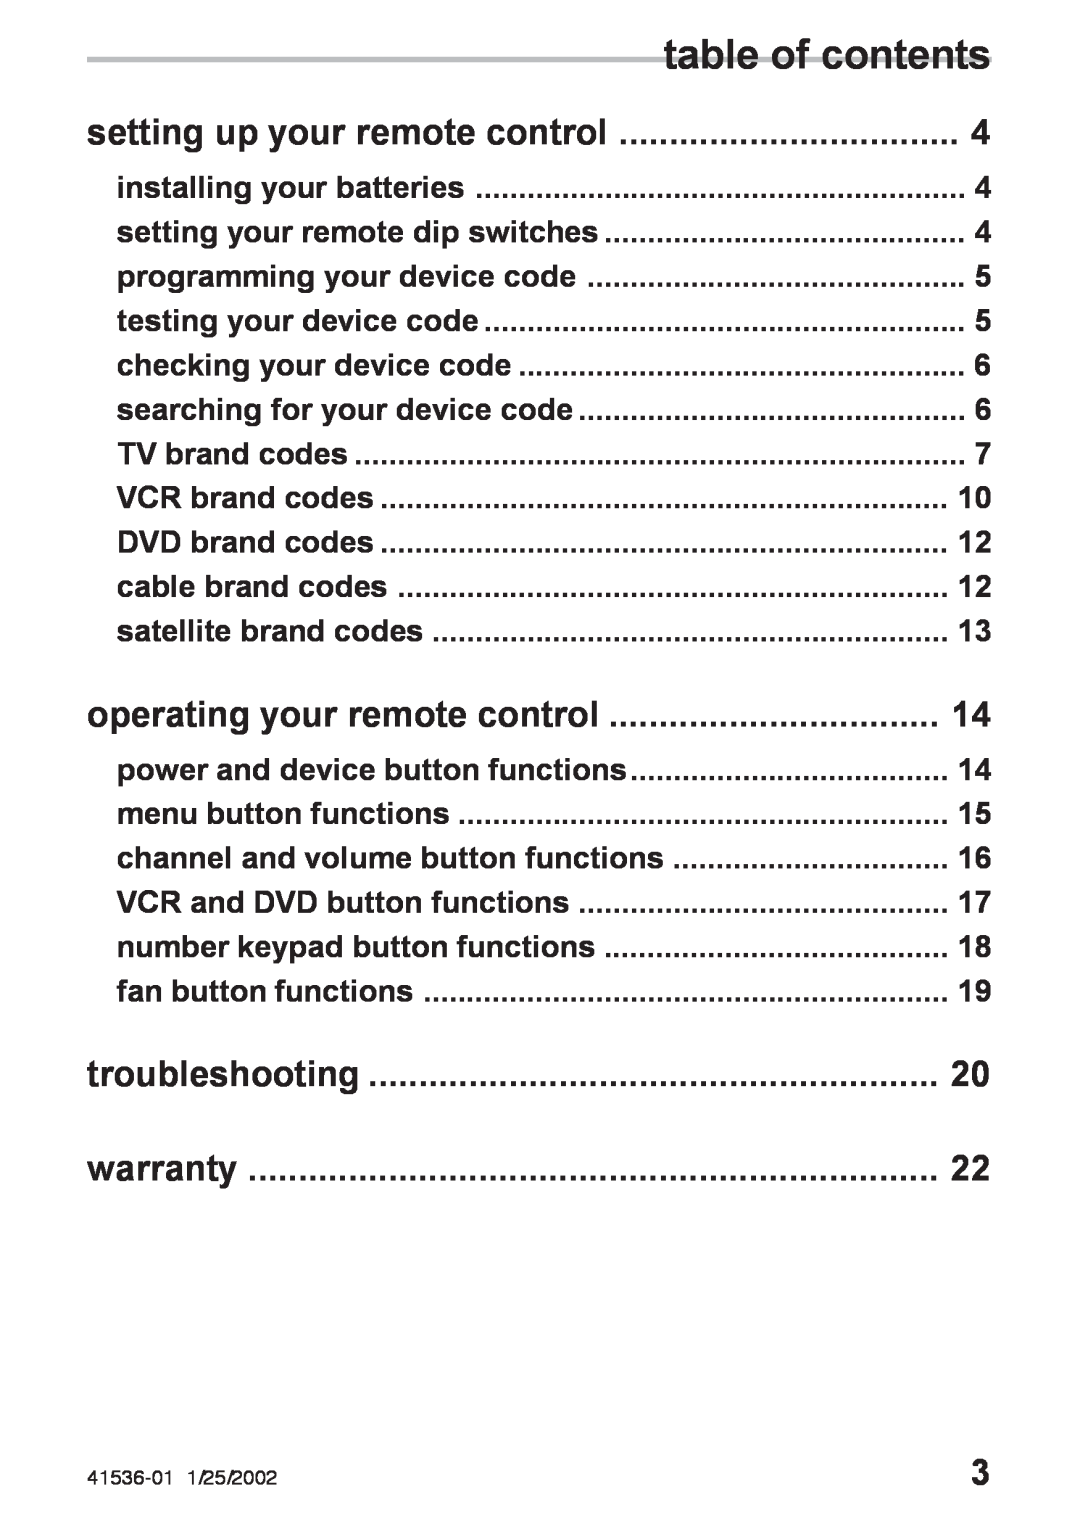 Hunter Fan 41536-01 table of contents, setting up your remote control, operating your remote control, troubleshooting 